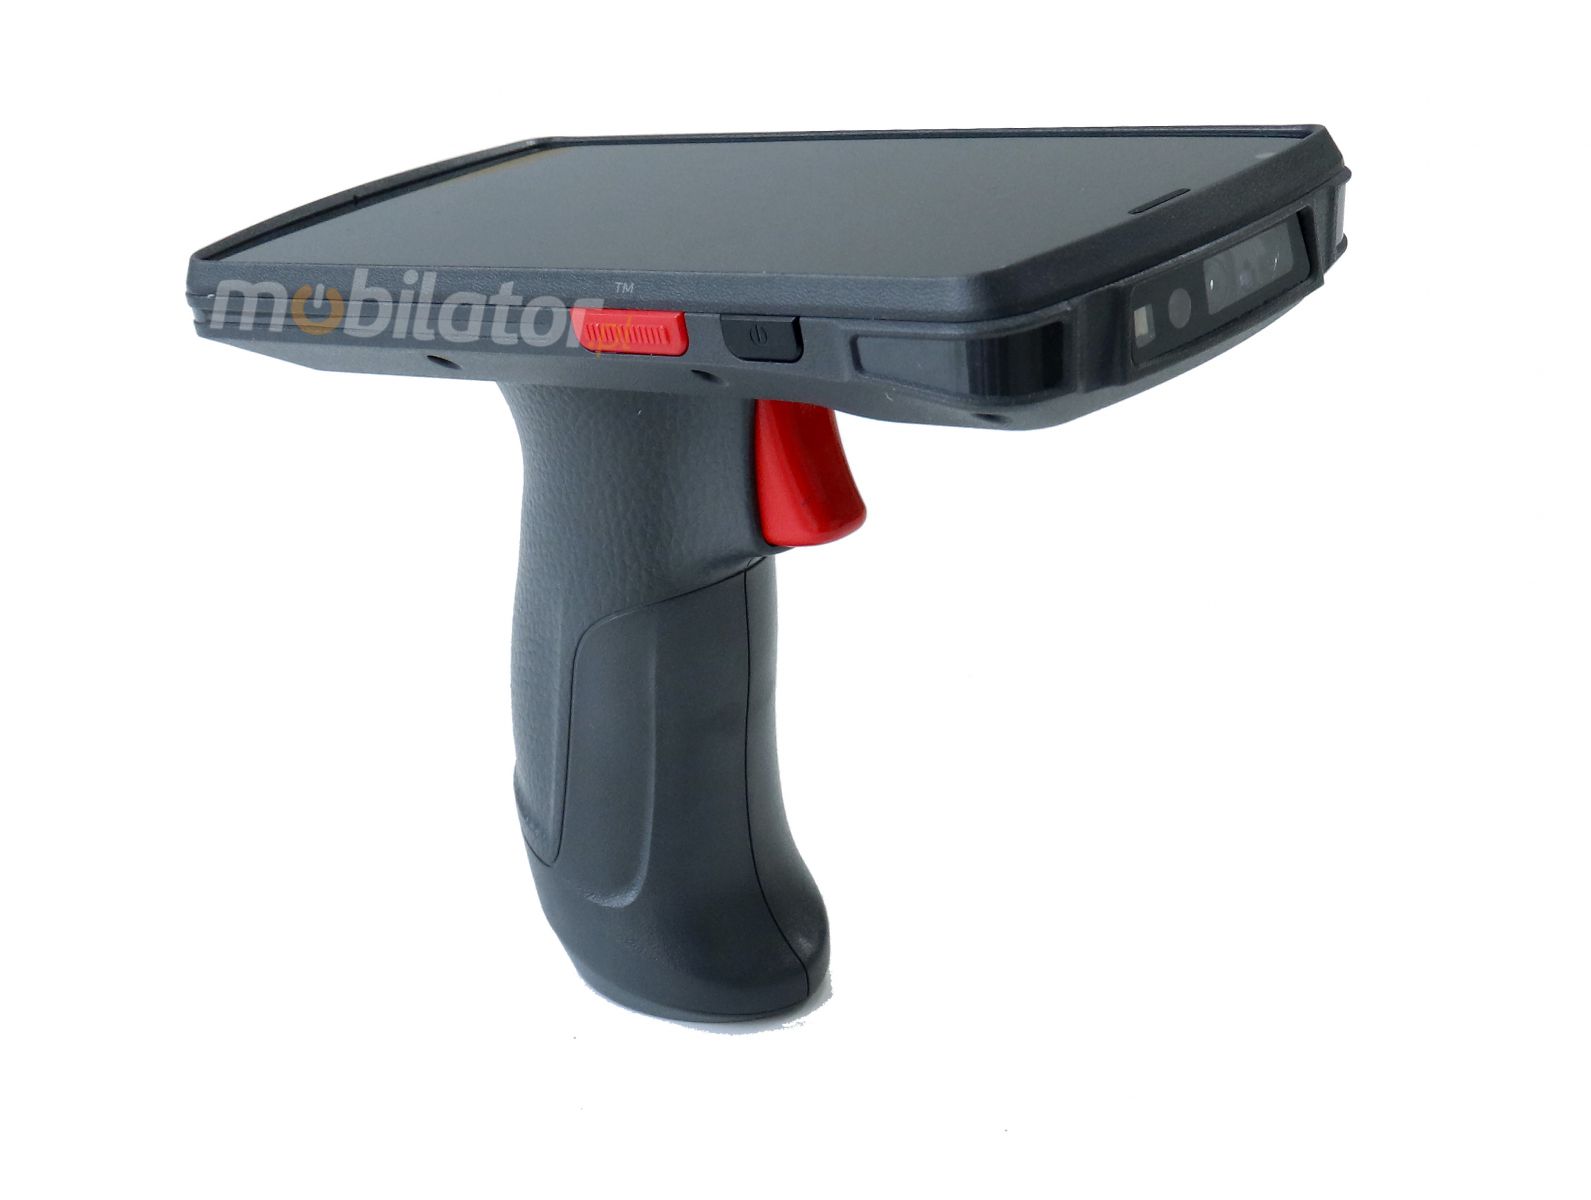 2020 new mobilator data collector ip66 full water protection